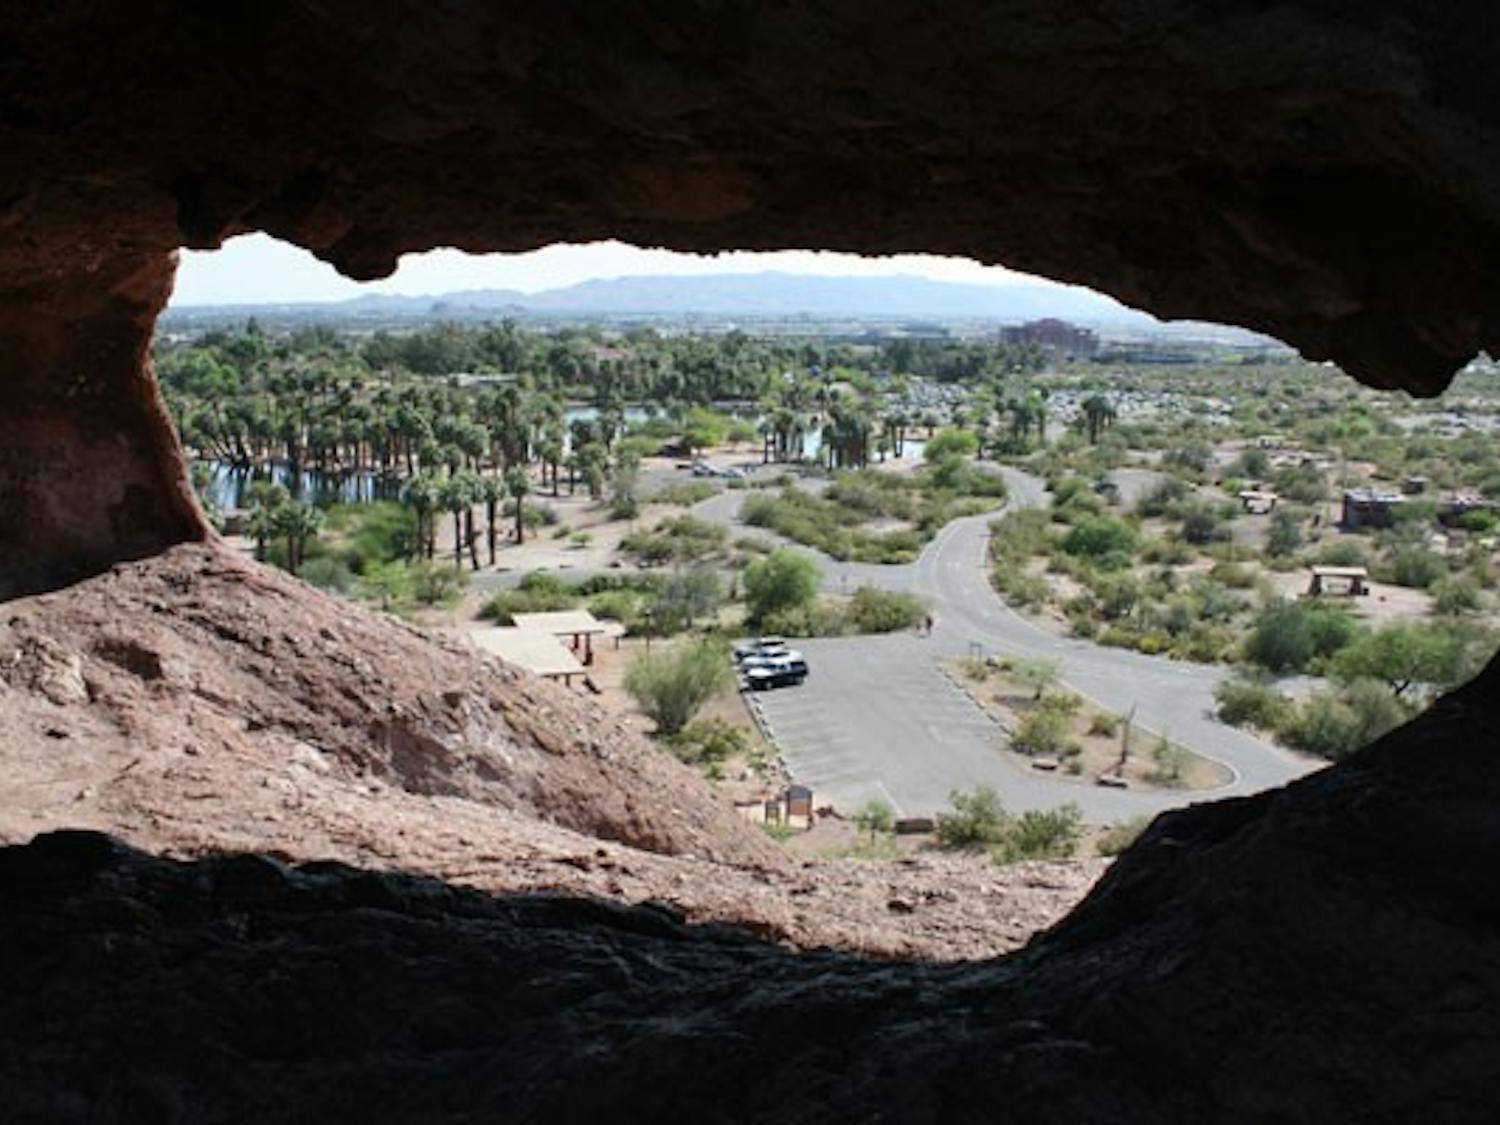 RED-ROCK VIEW: South Mountain and Southern Phoenix are framed within the tafoni (hole) in the rocks in Papago Peak. (Photo by Kyle Thompson)